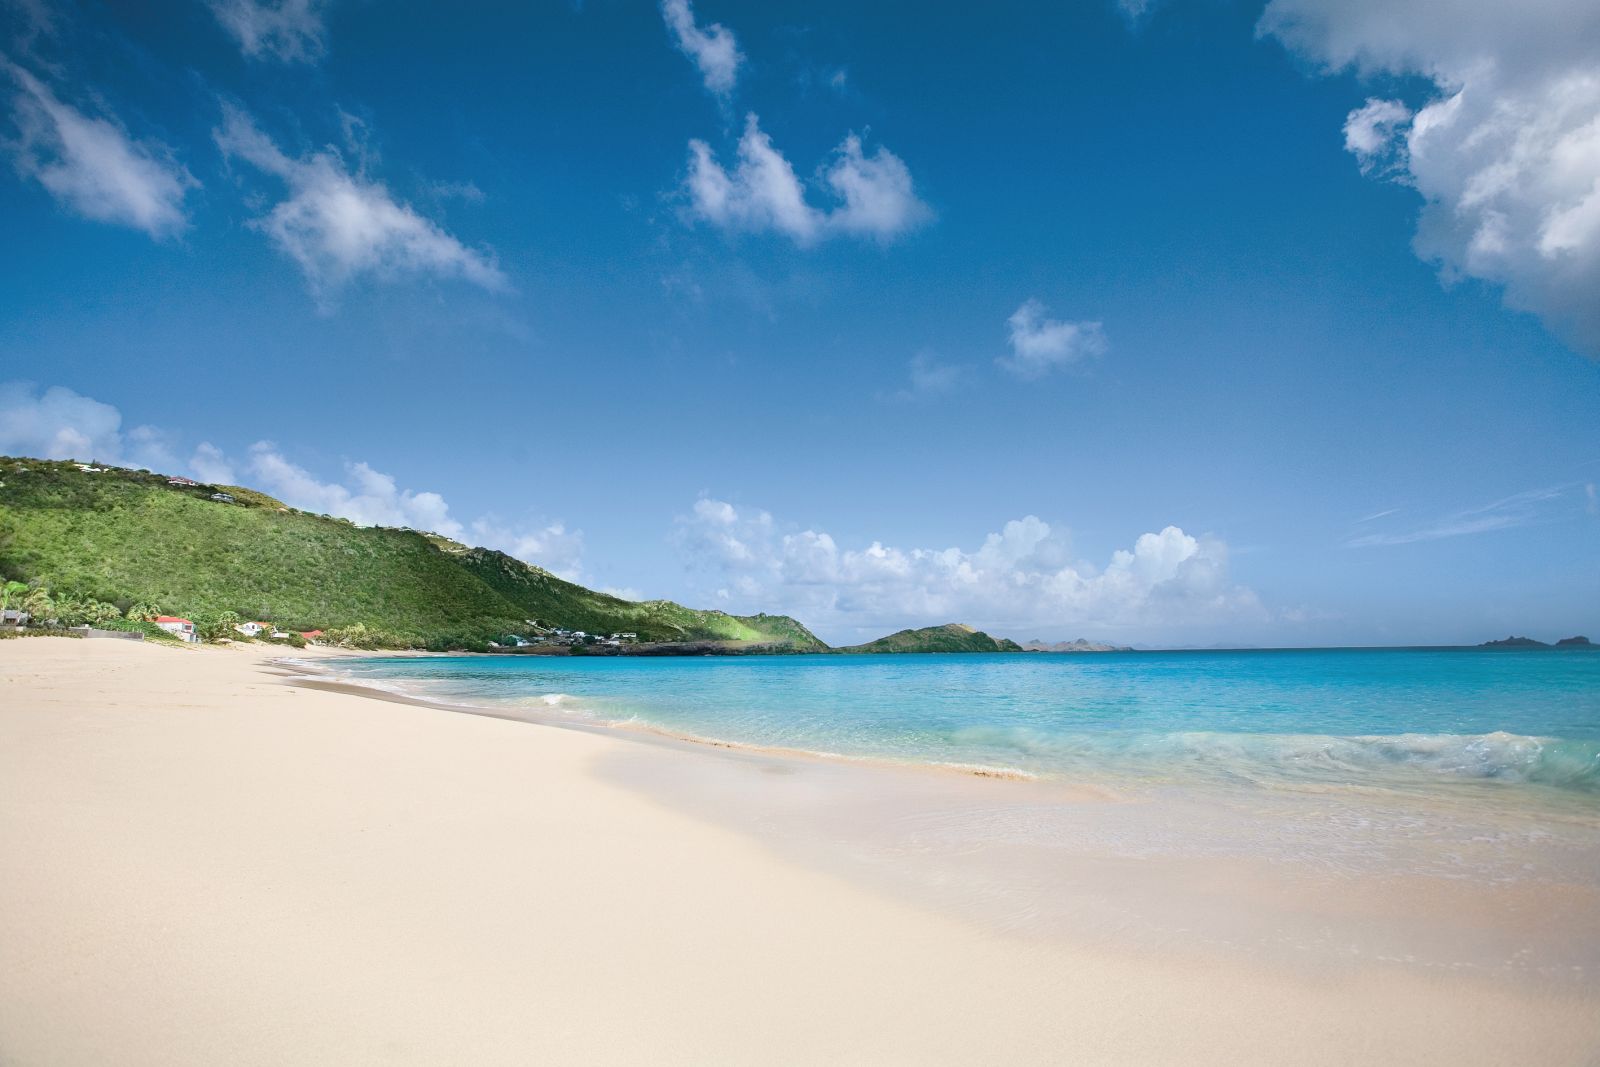 A view of the beach with white sands and blue sky at Hotel Cheval Blanc in St Barths